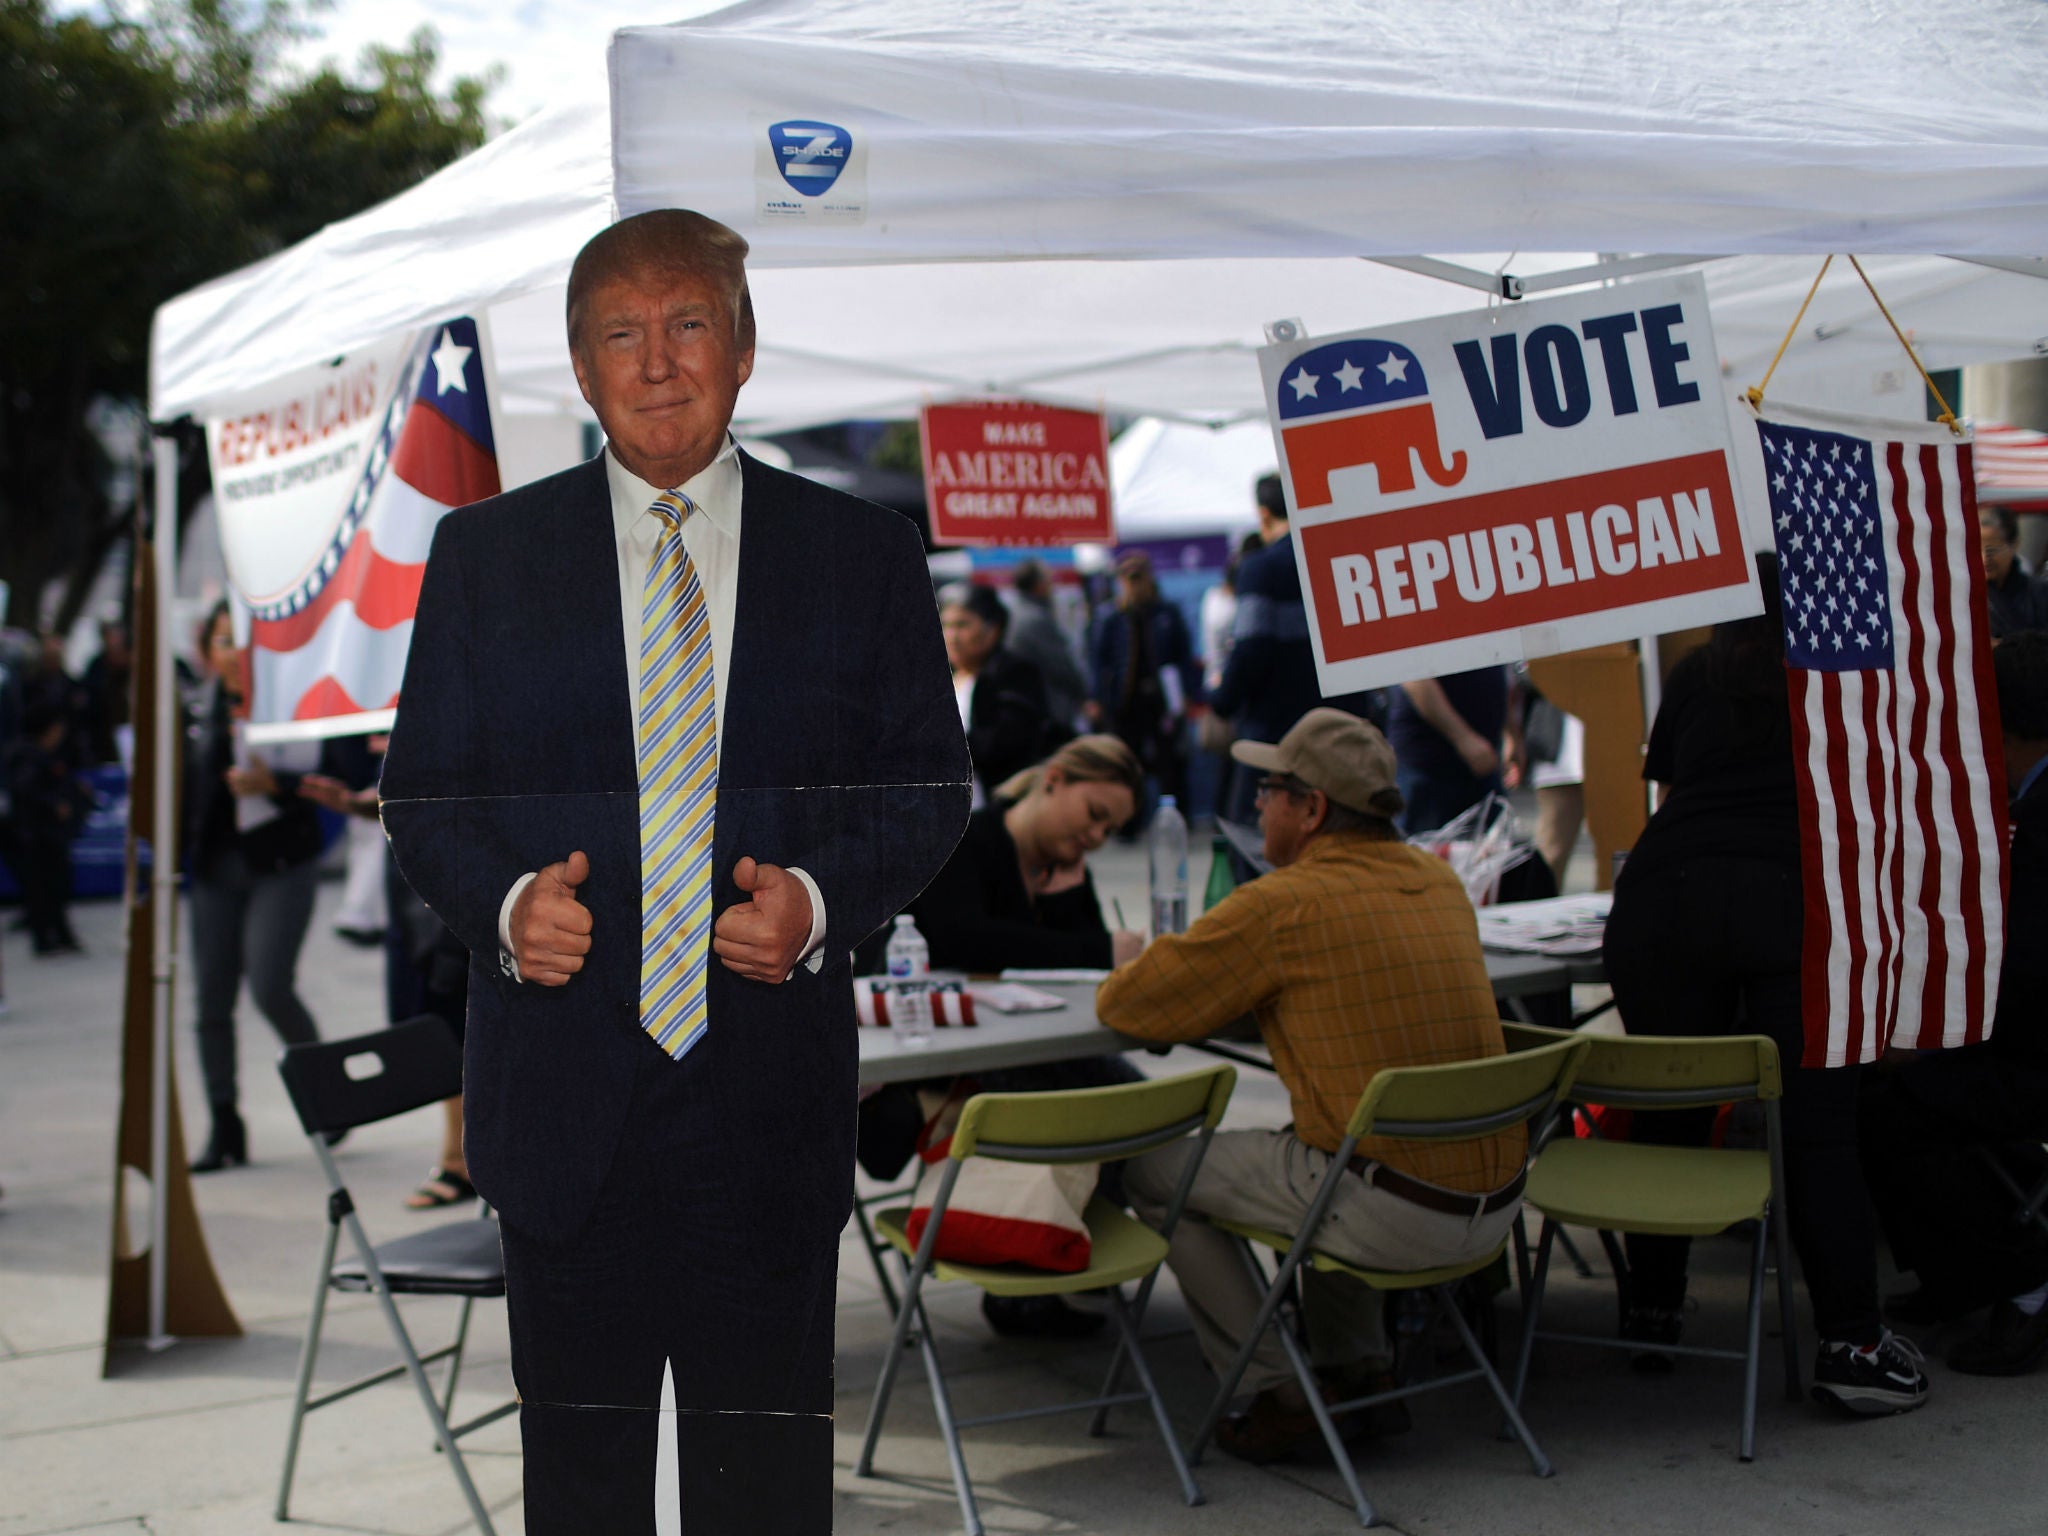 A Republican voter registration tent is seen in Los Angeles, California